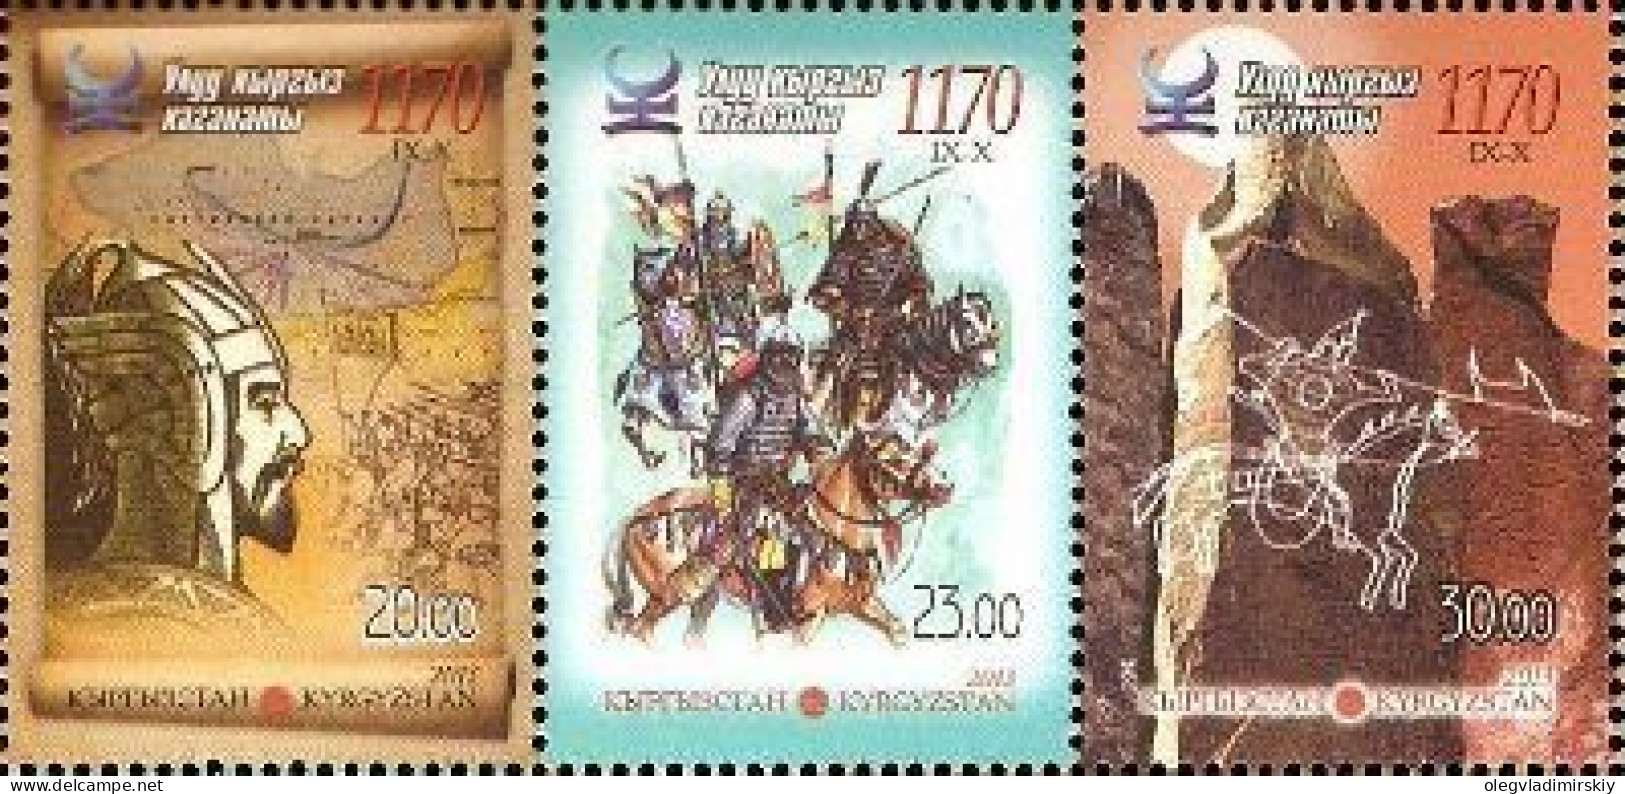 Kyrgyzstan 2013 Great Kyrgyz Kaganate 1170 Years Set Of 3 Stamps In Strip MNH - Archeologia